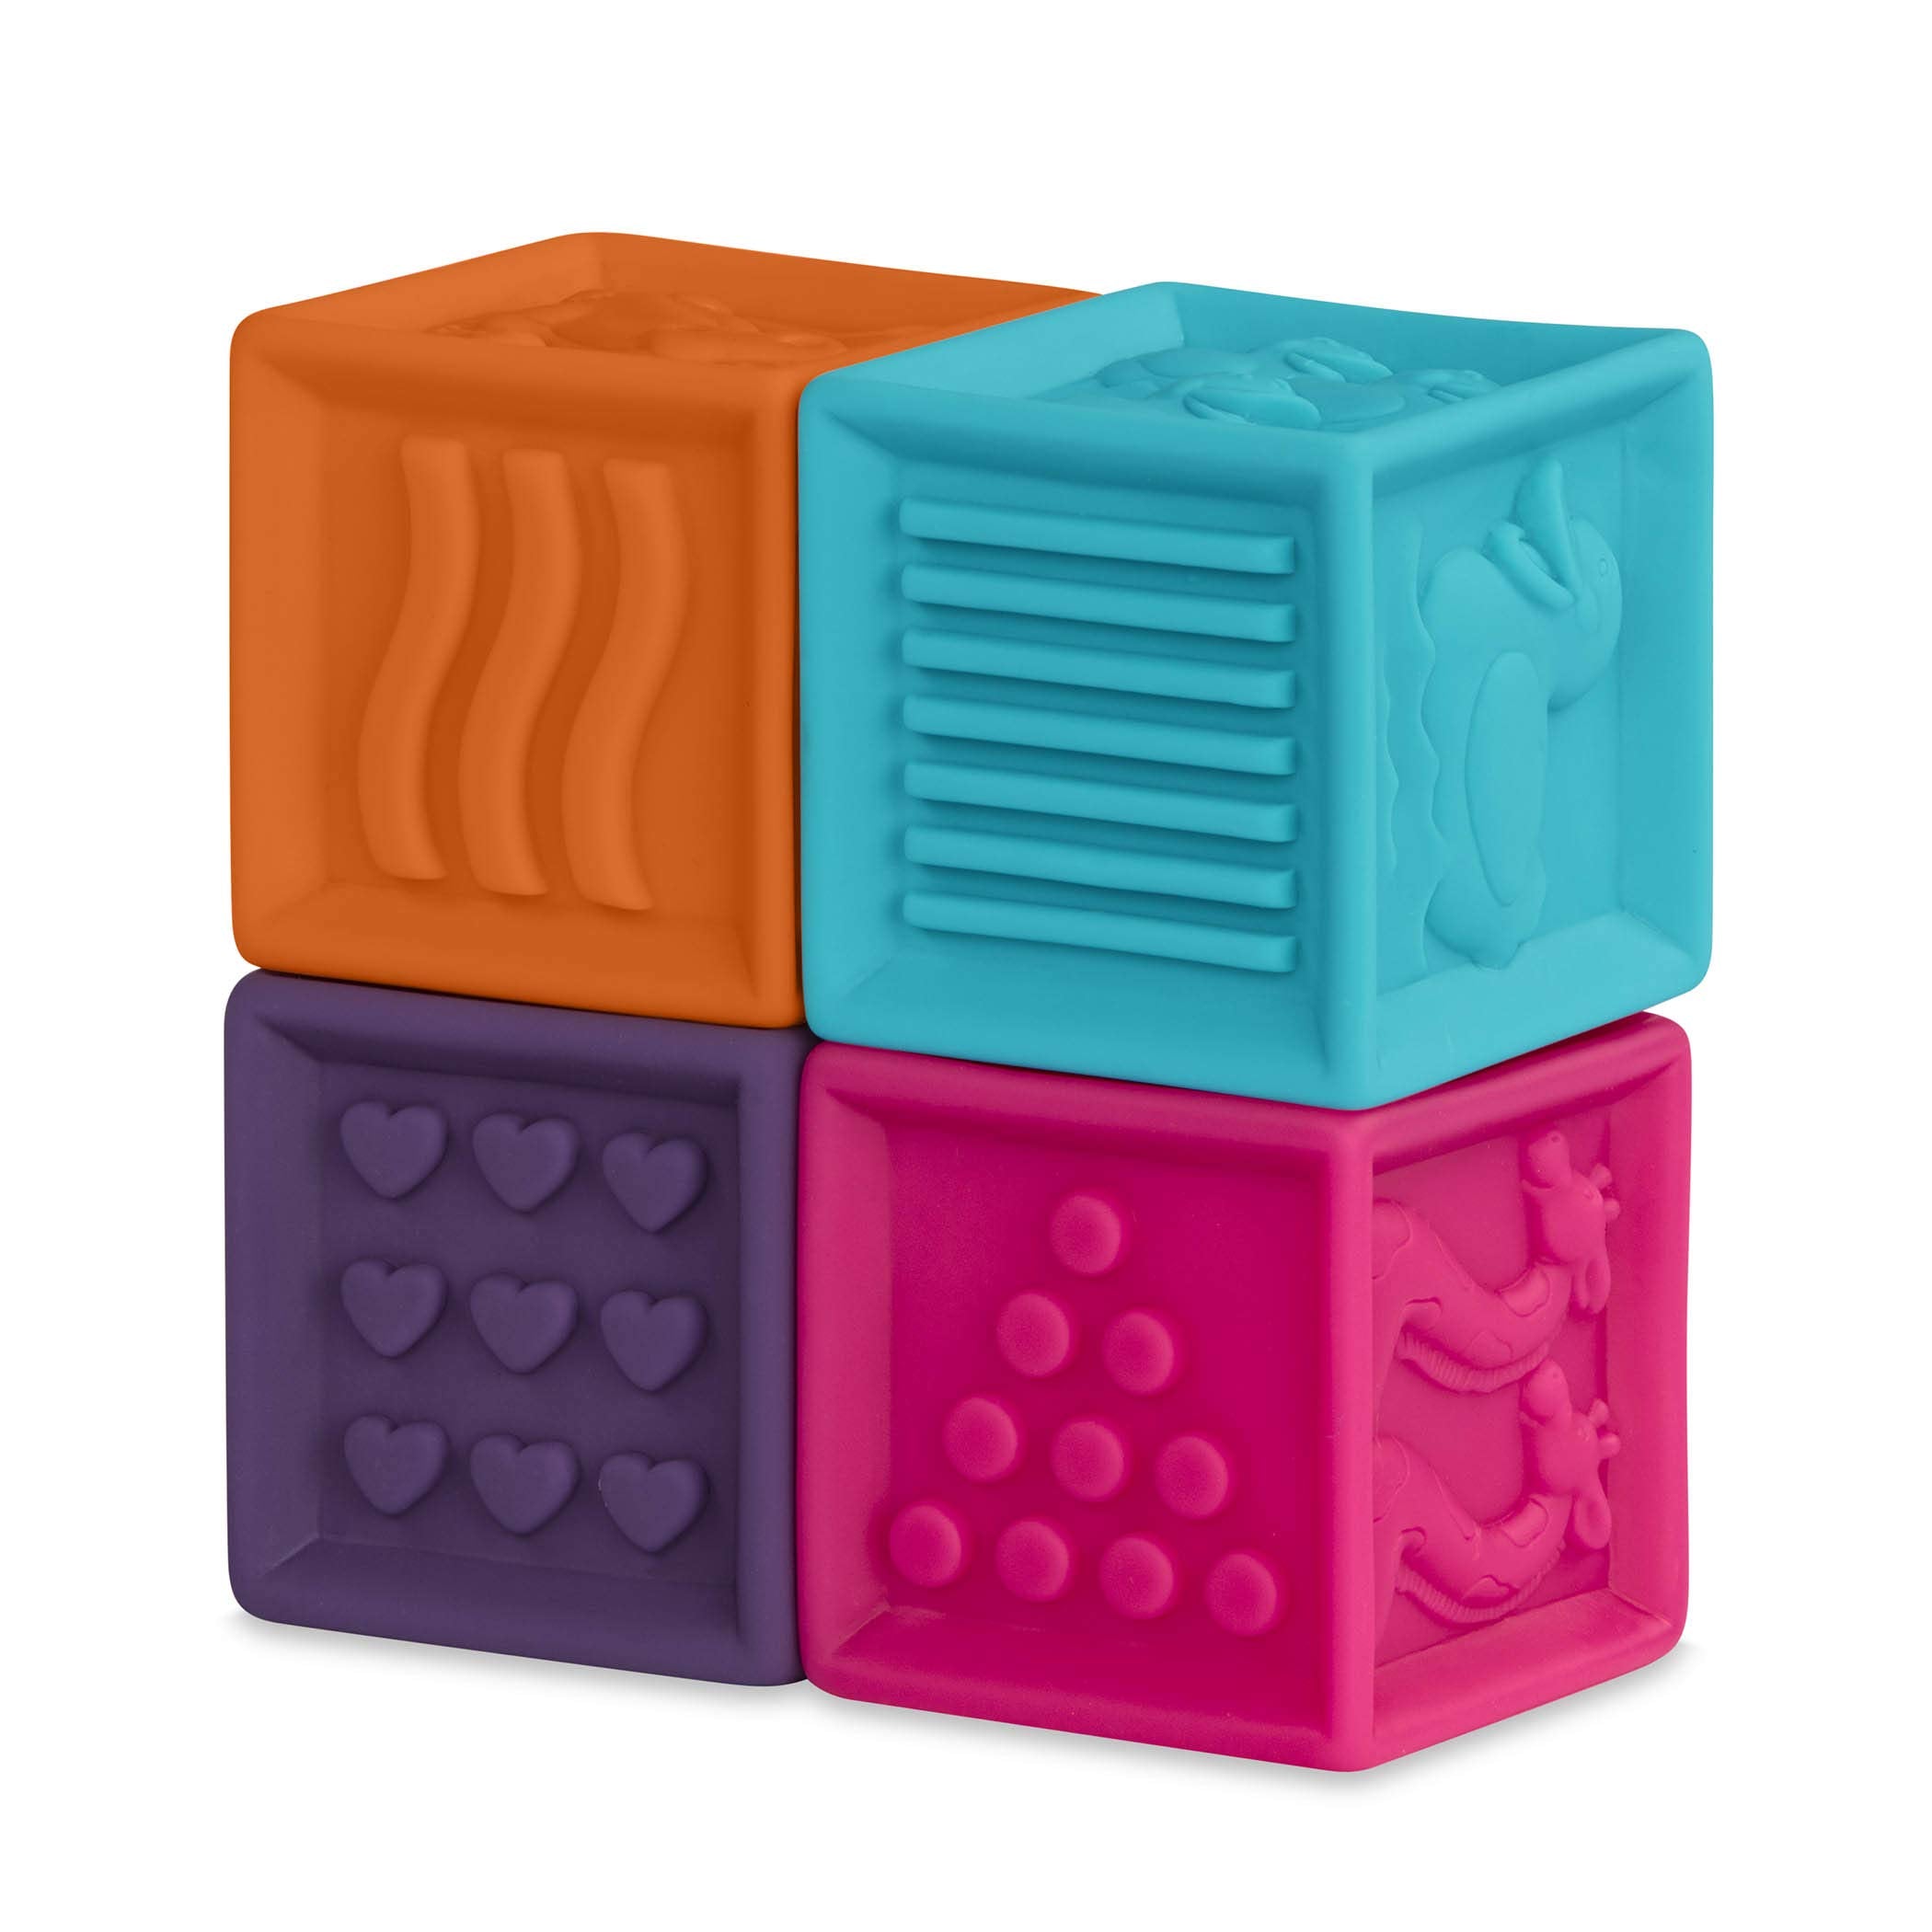 b toys one two squeeze blocks